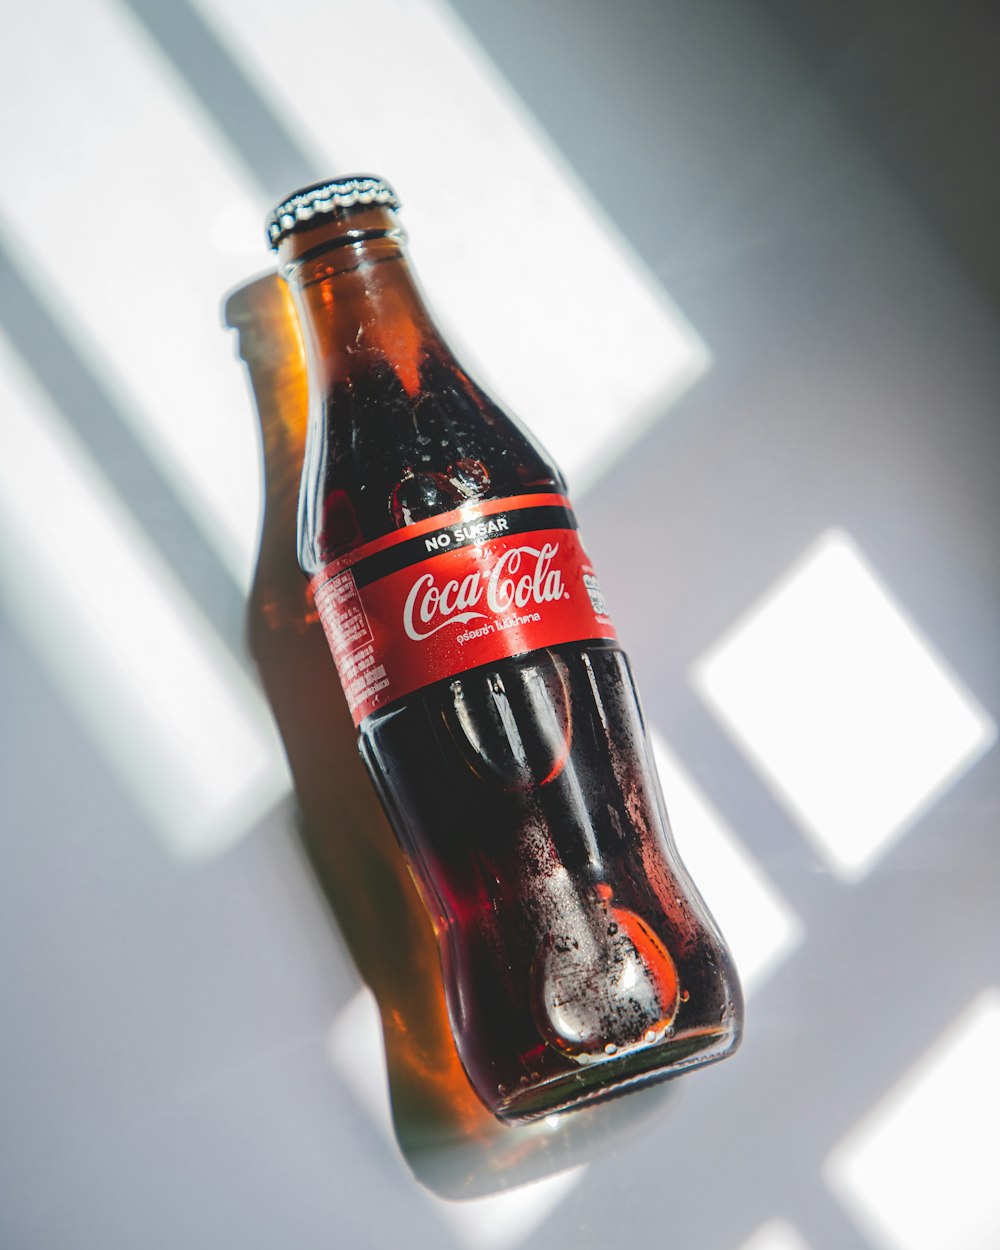 coca cola bottle on white table